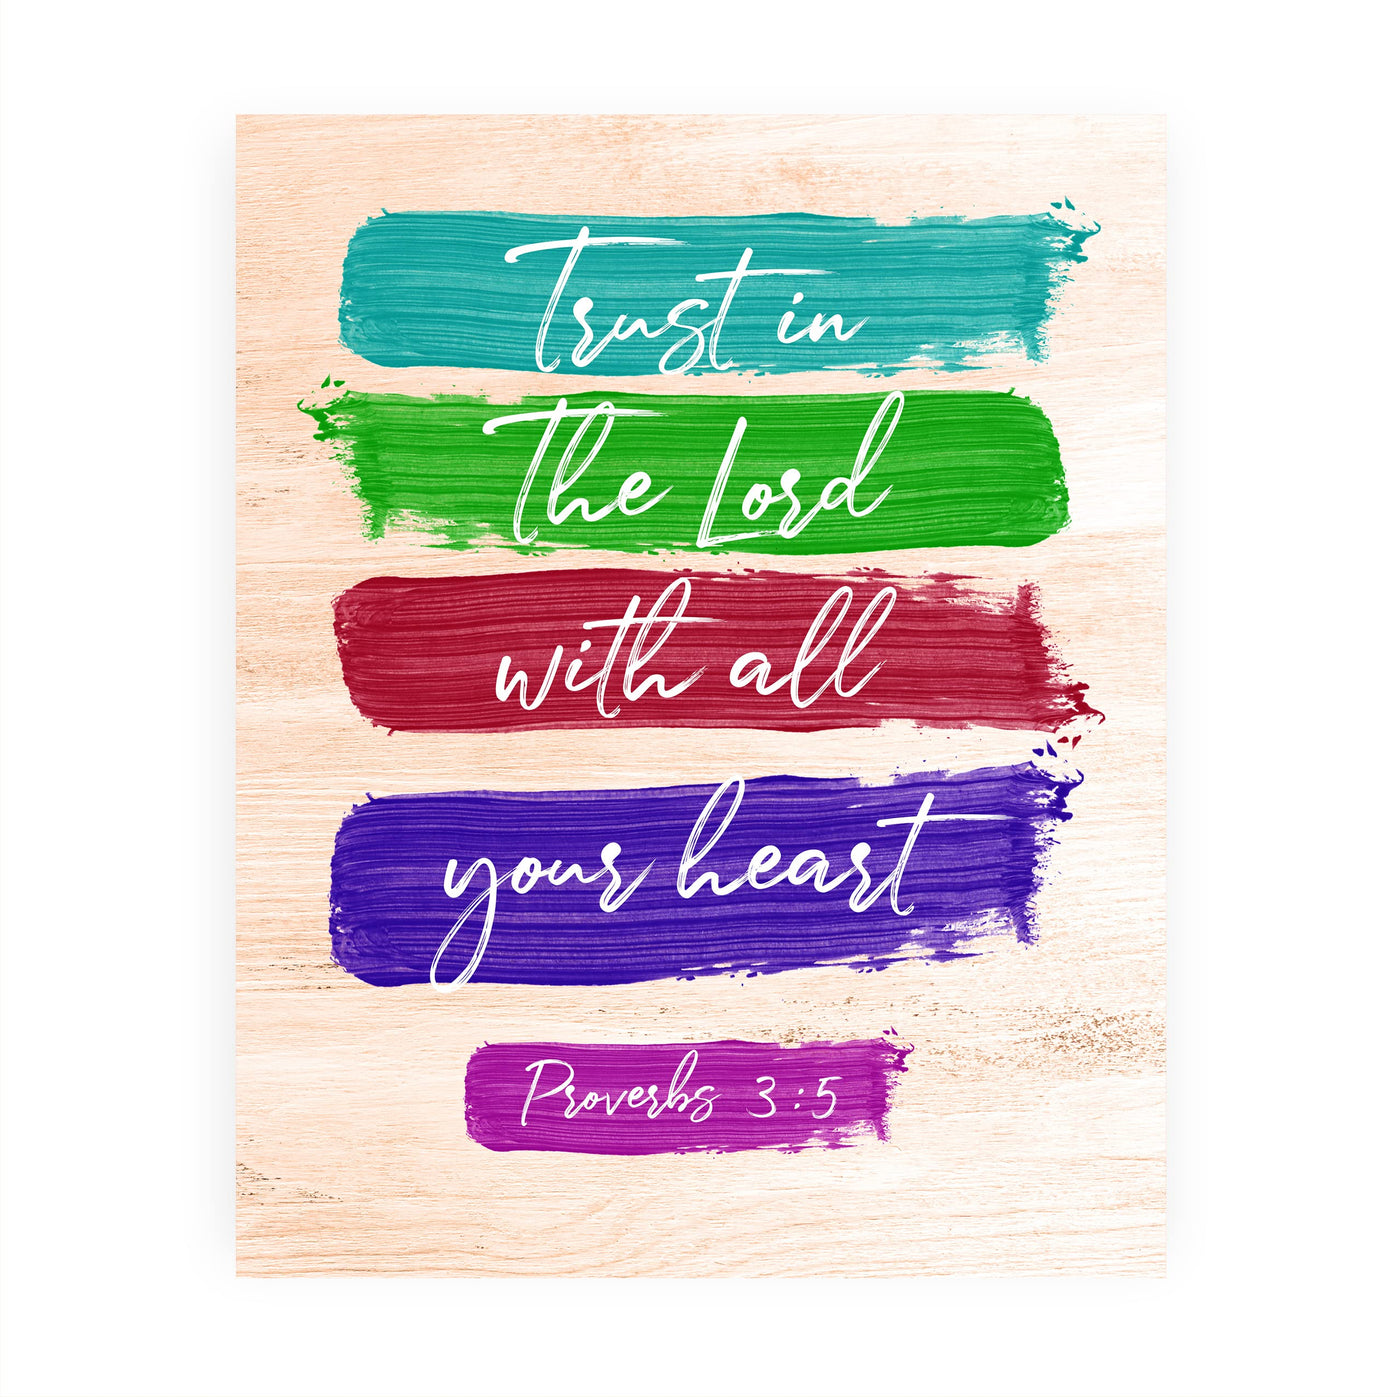 Trust In the Lord With All Your Heart- Bible Verse Wall Art -8 x 10" Scripture Painting Design Print -Ready to Frame. Inspirational Home-Office-Church Decor. Great Religious Gift! Proverbs 3:5